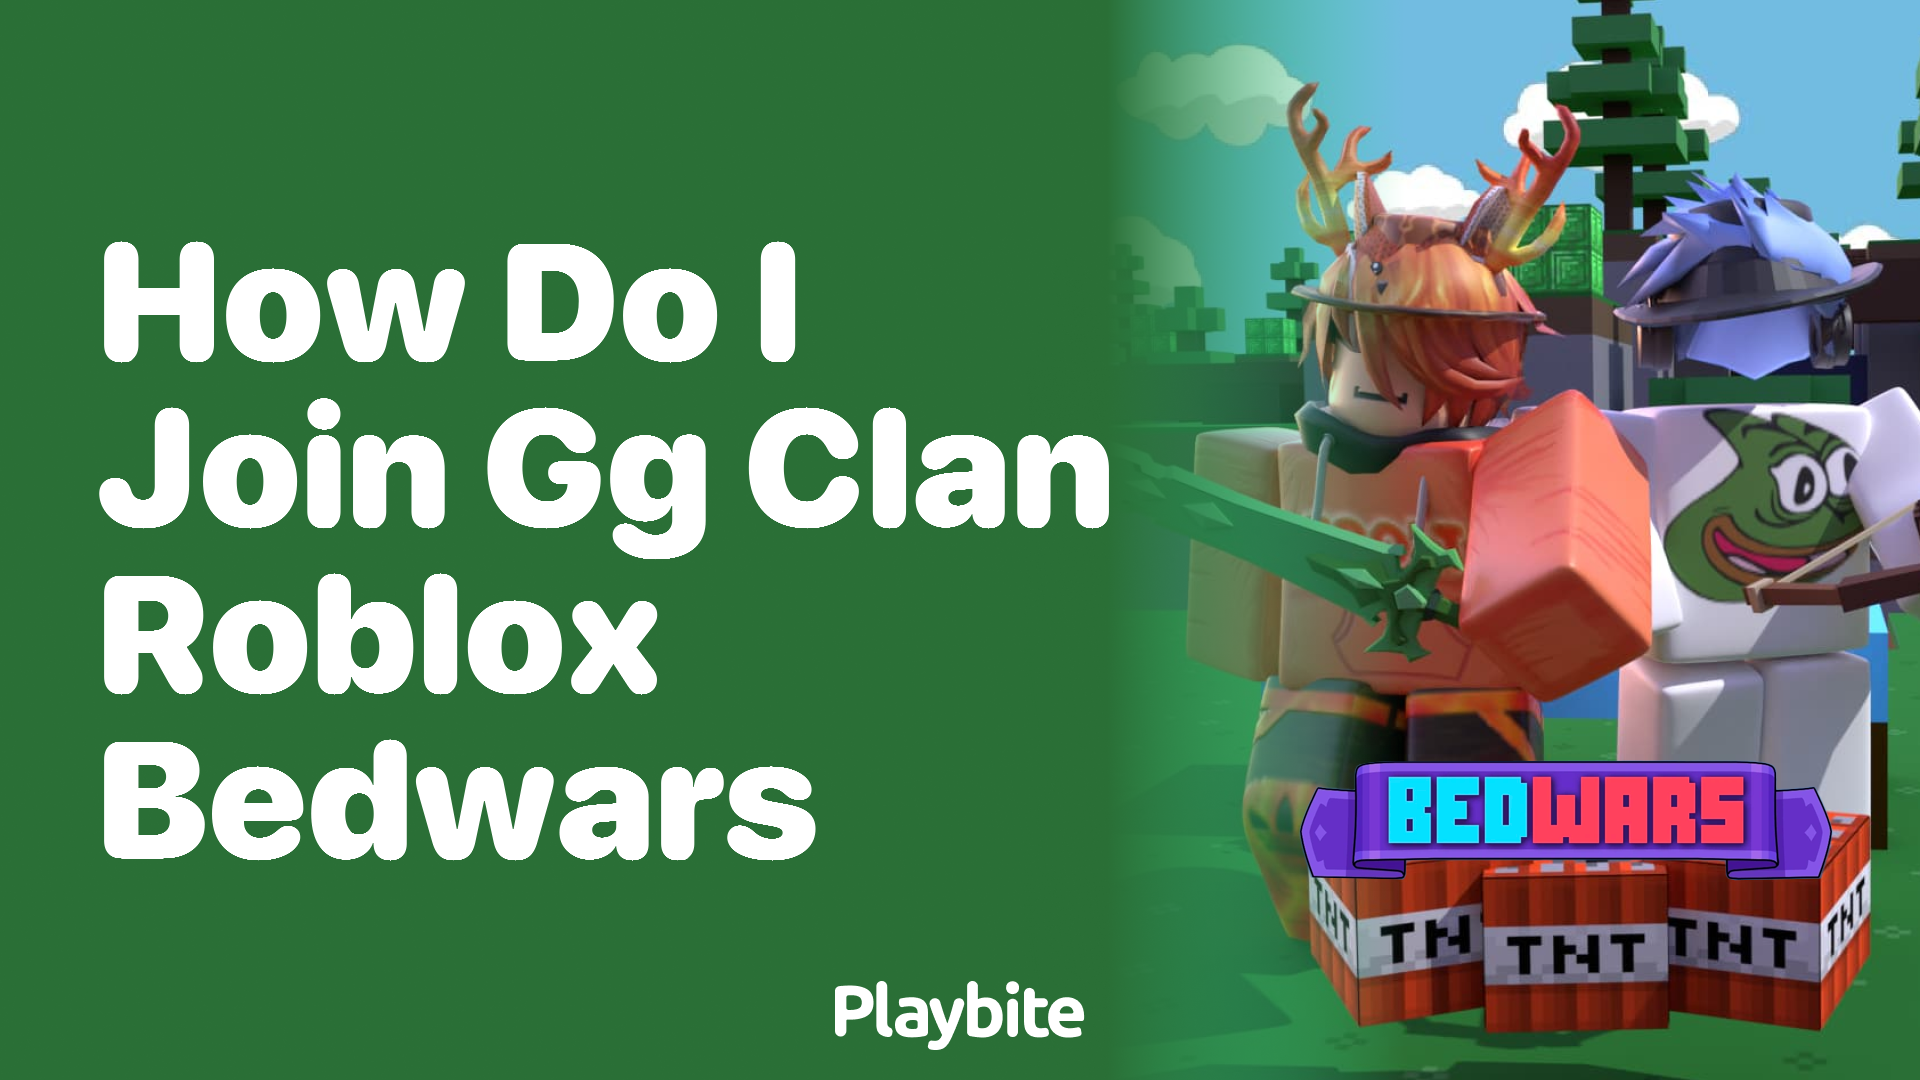 How to Join the GG Clan in Roblox Bedwars